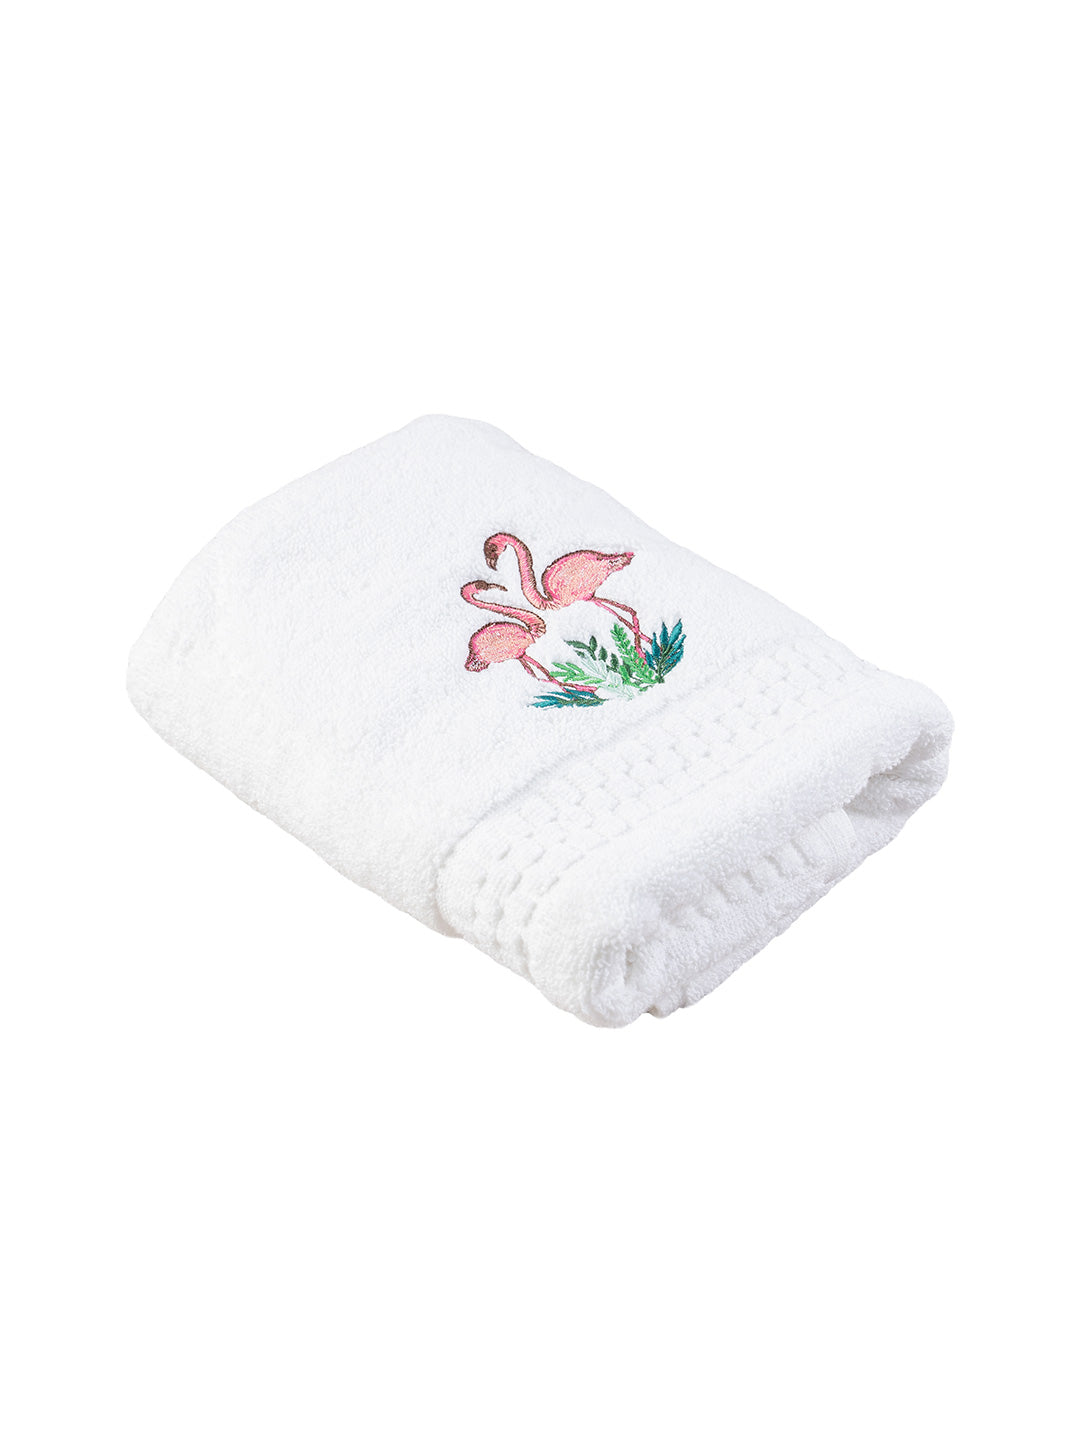 Hand Towels - Tropical Embroidered Gift Set